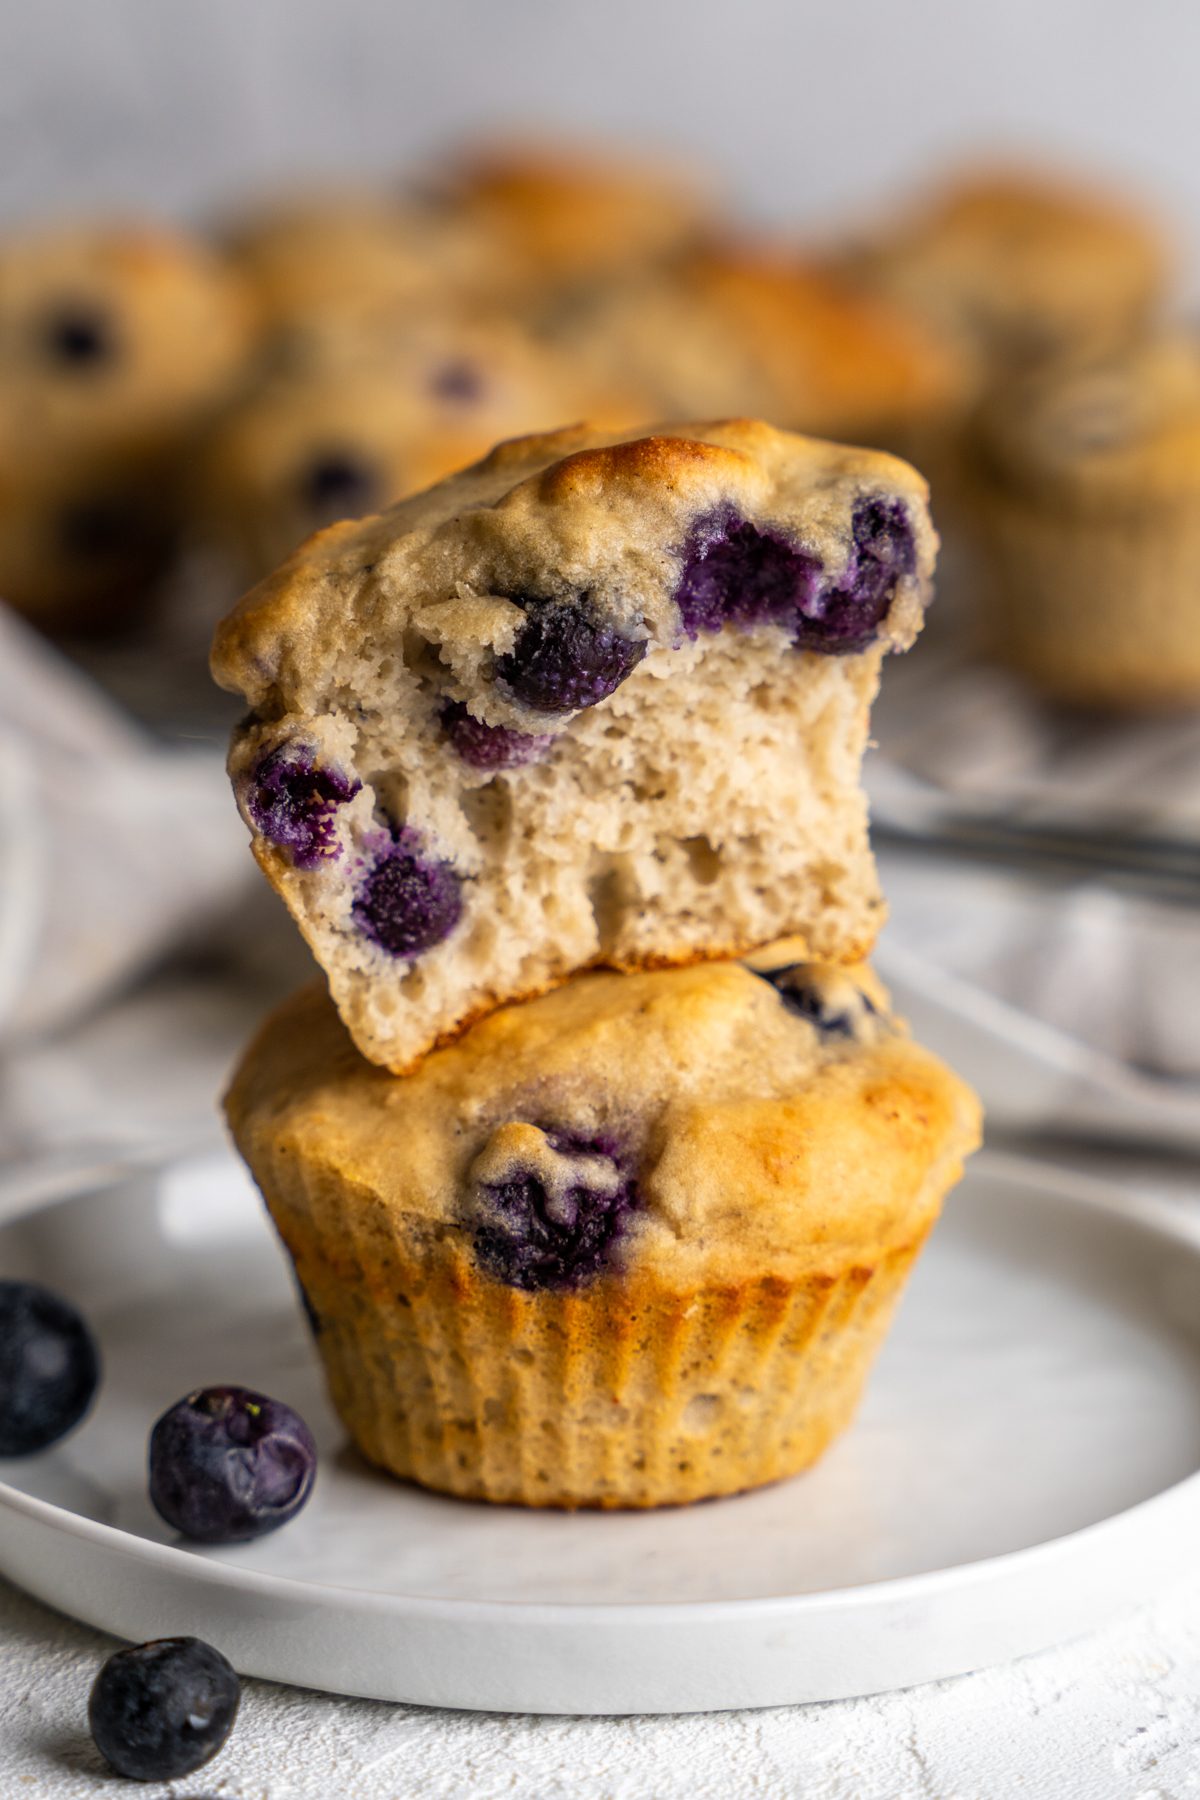 Half of a blueberry protein muffin.